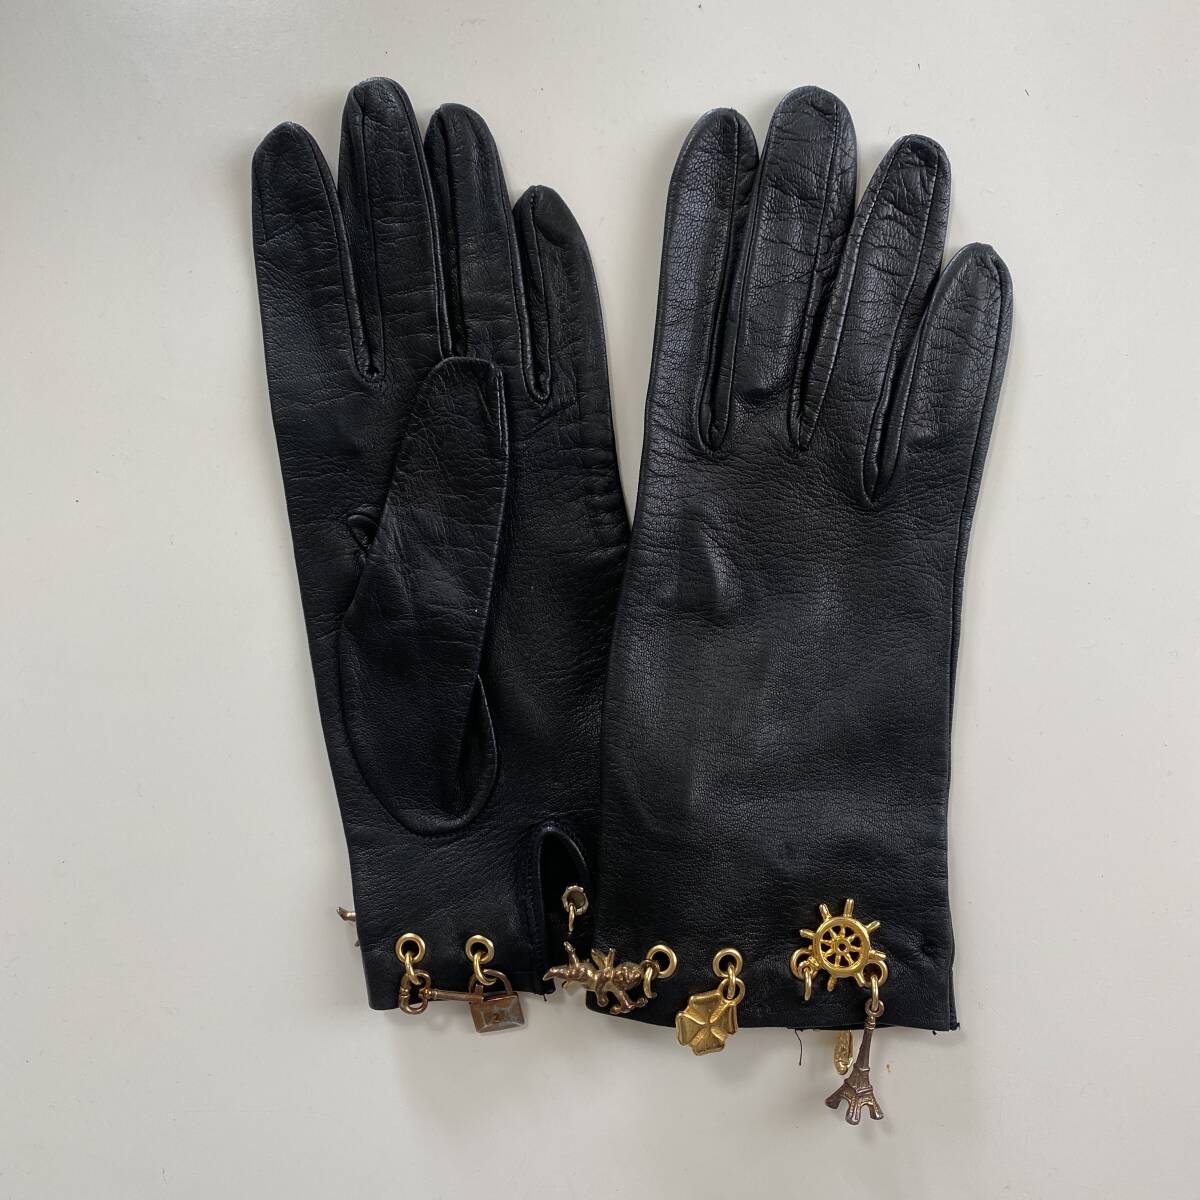 [ beautiful goods ] lady's size leather glove black black leather gloves Gold charm attaching size 7 lining less 